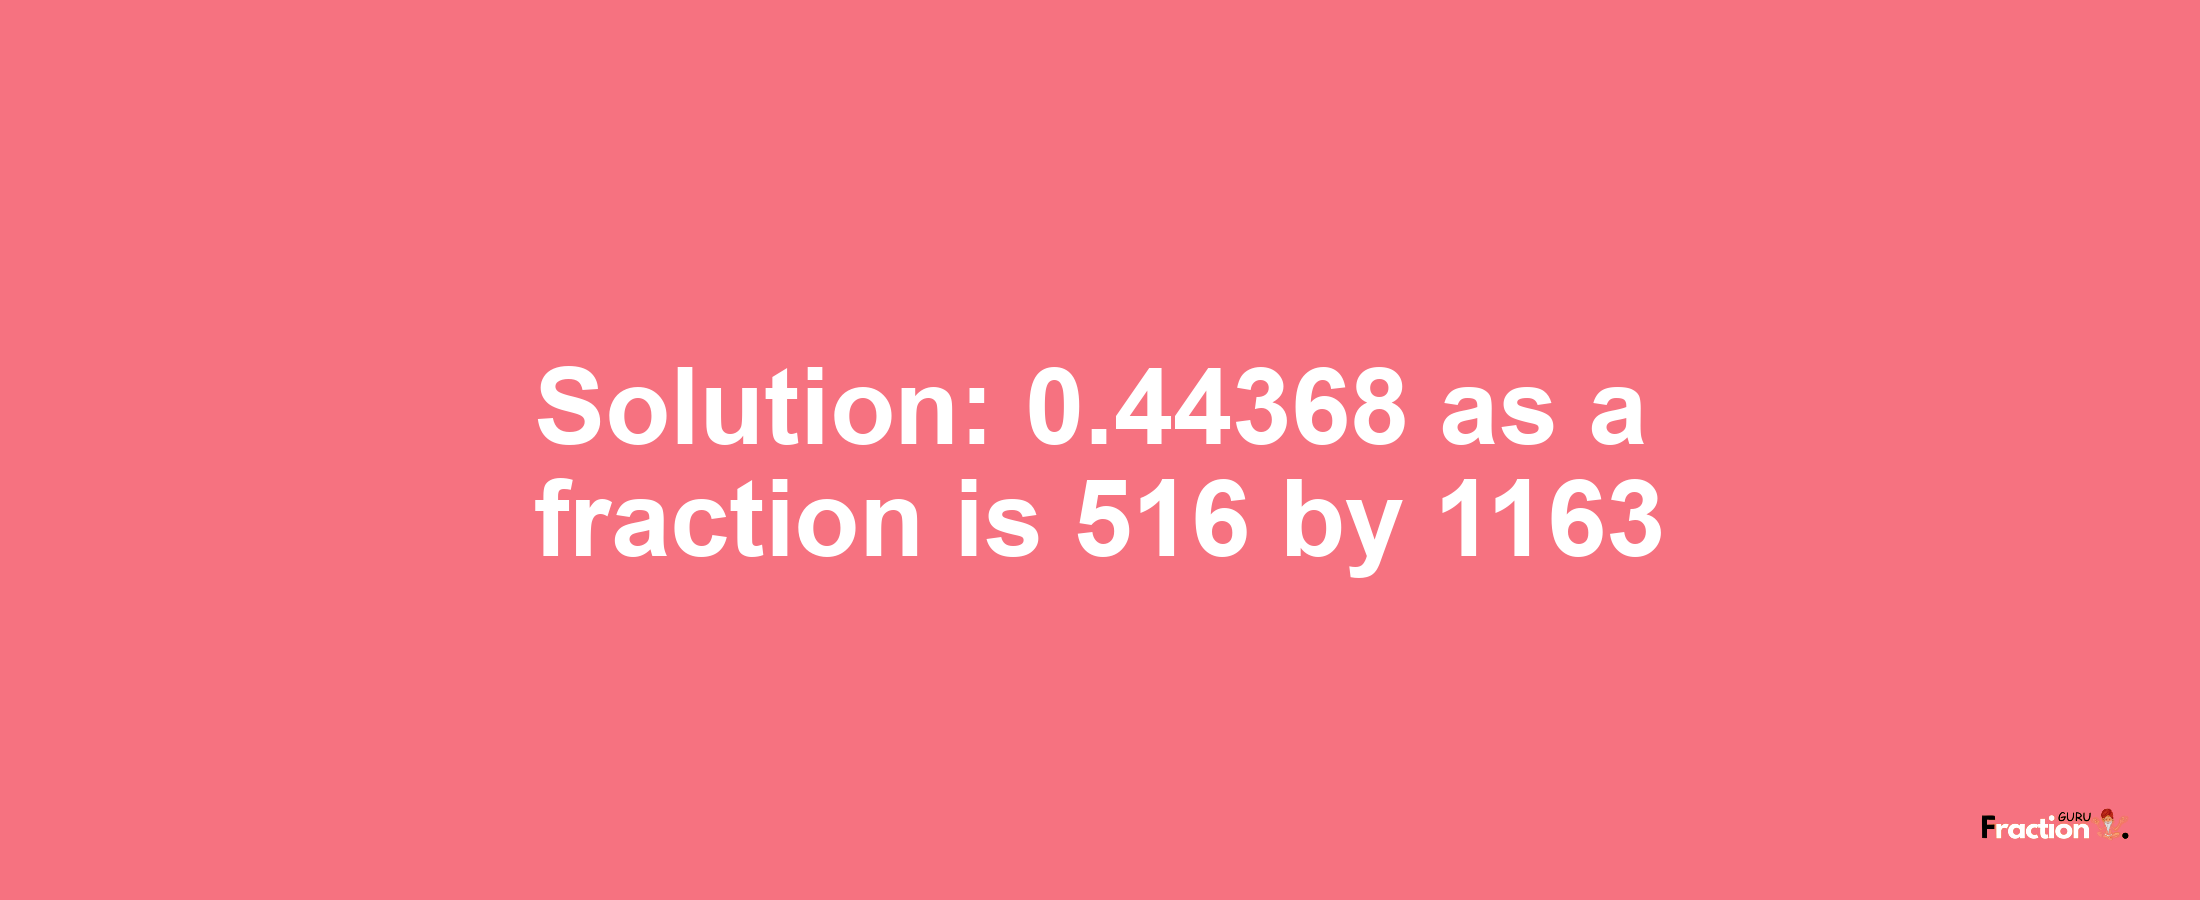 Solution:0.44368 as a fraction is 516/1163